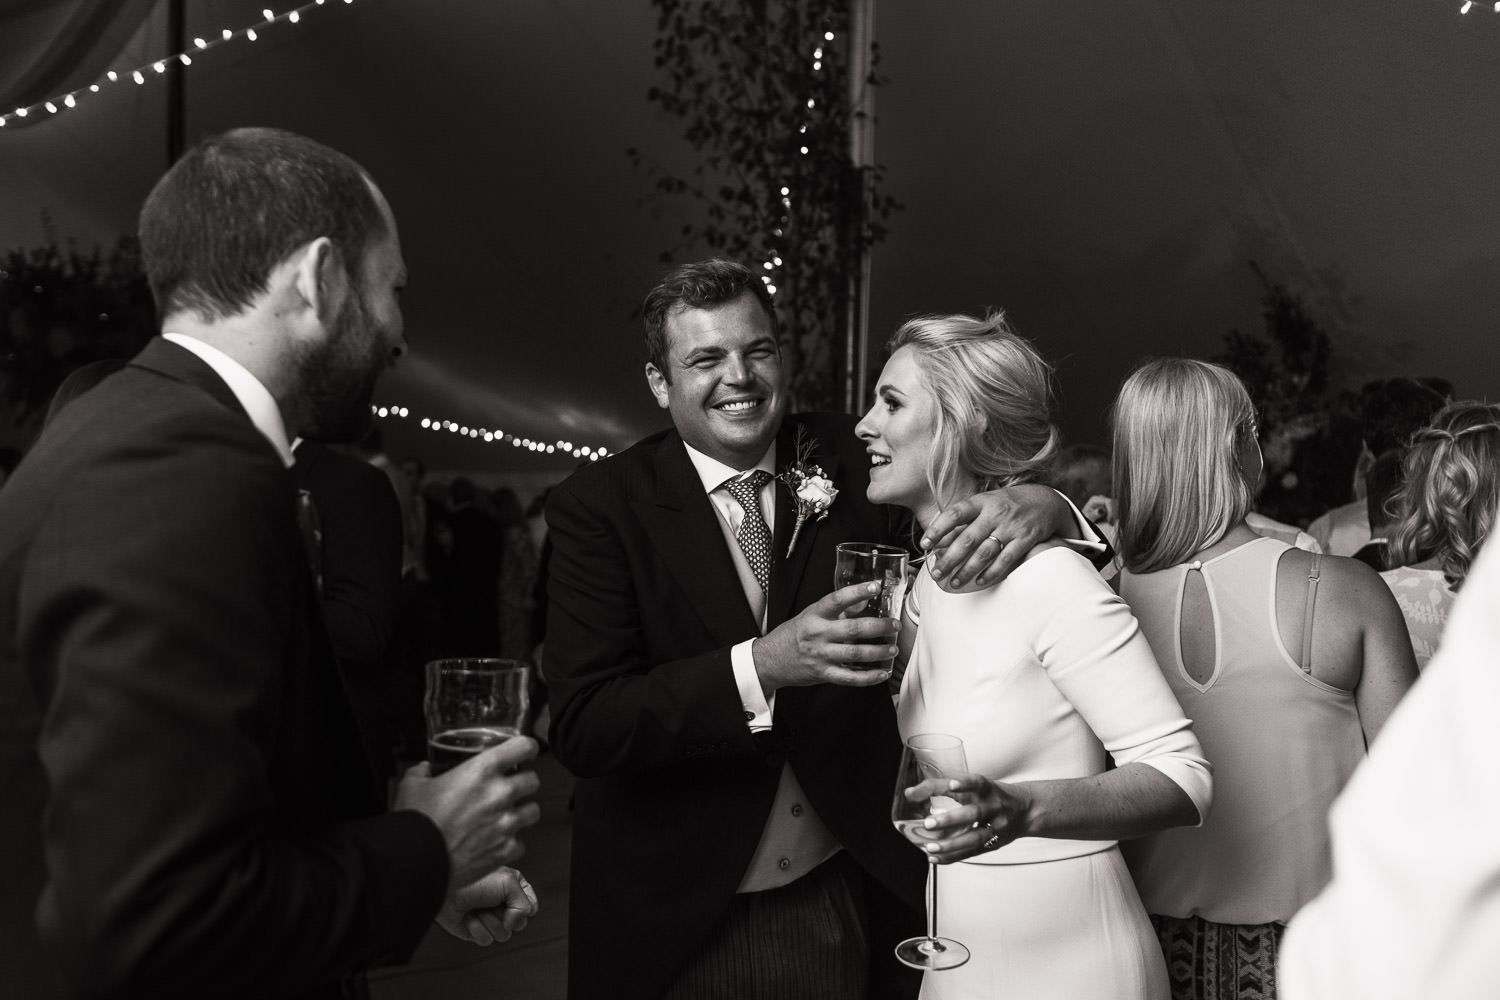 Bride and groom together holding drinks at the reception a Sail & Cloth marquee.